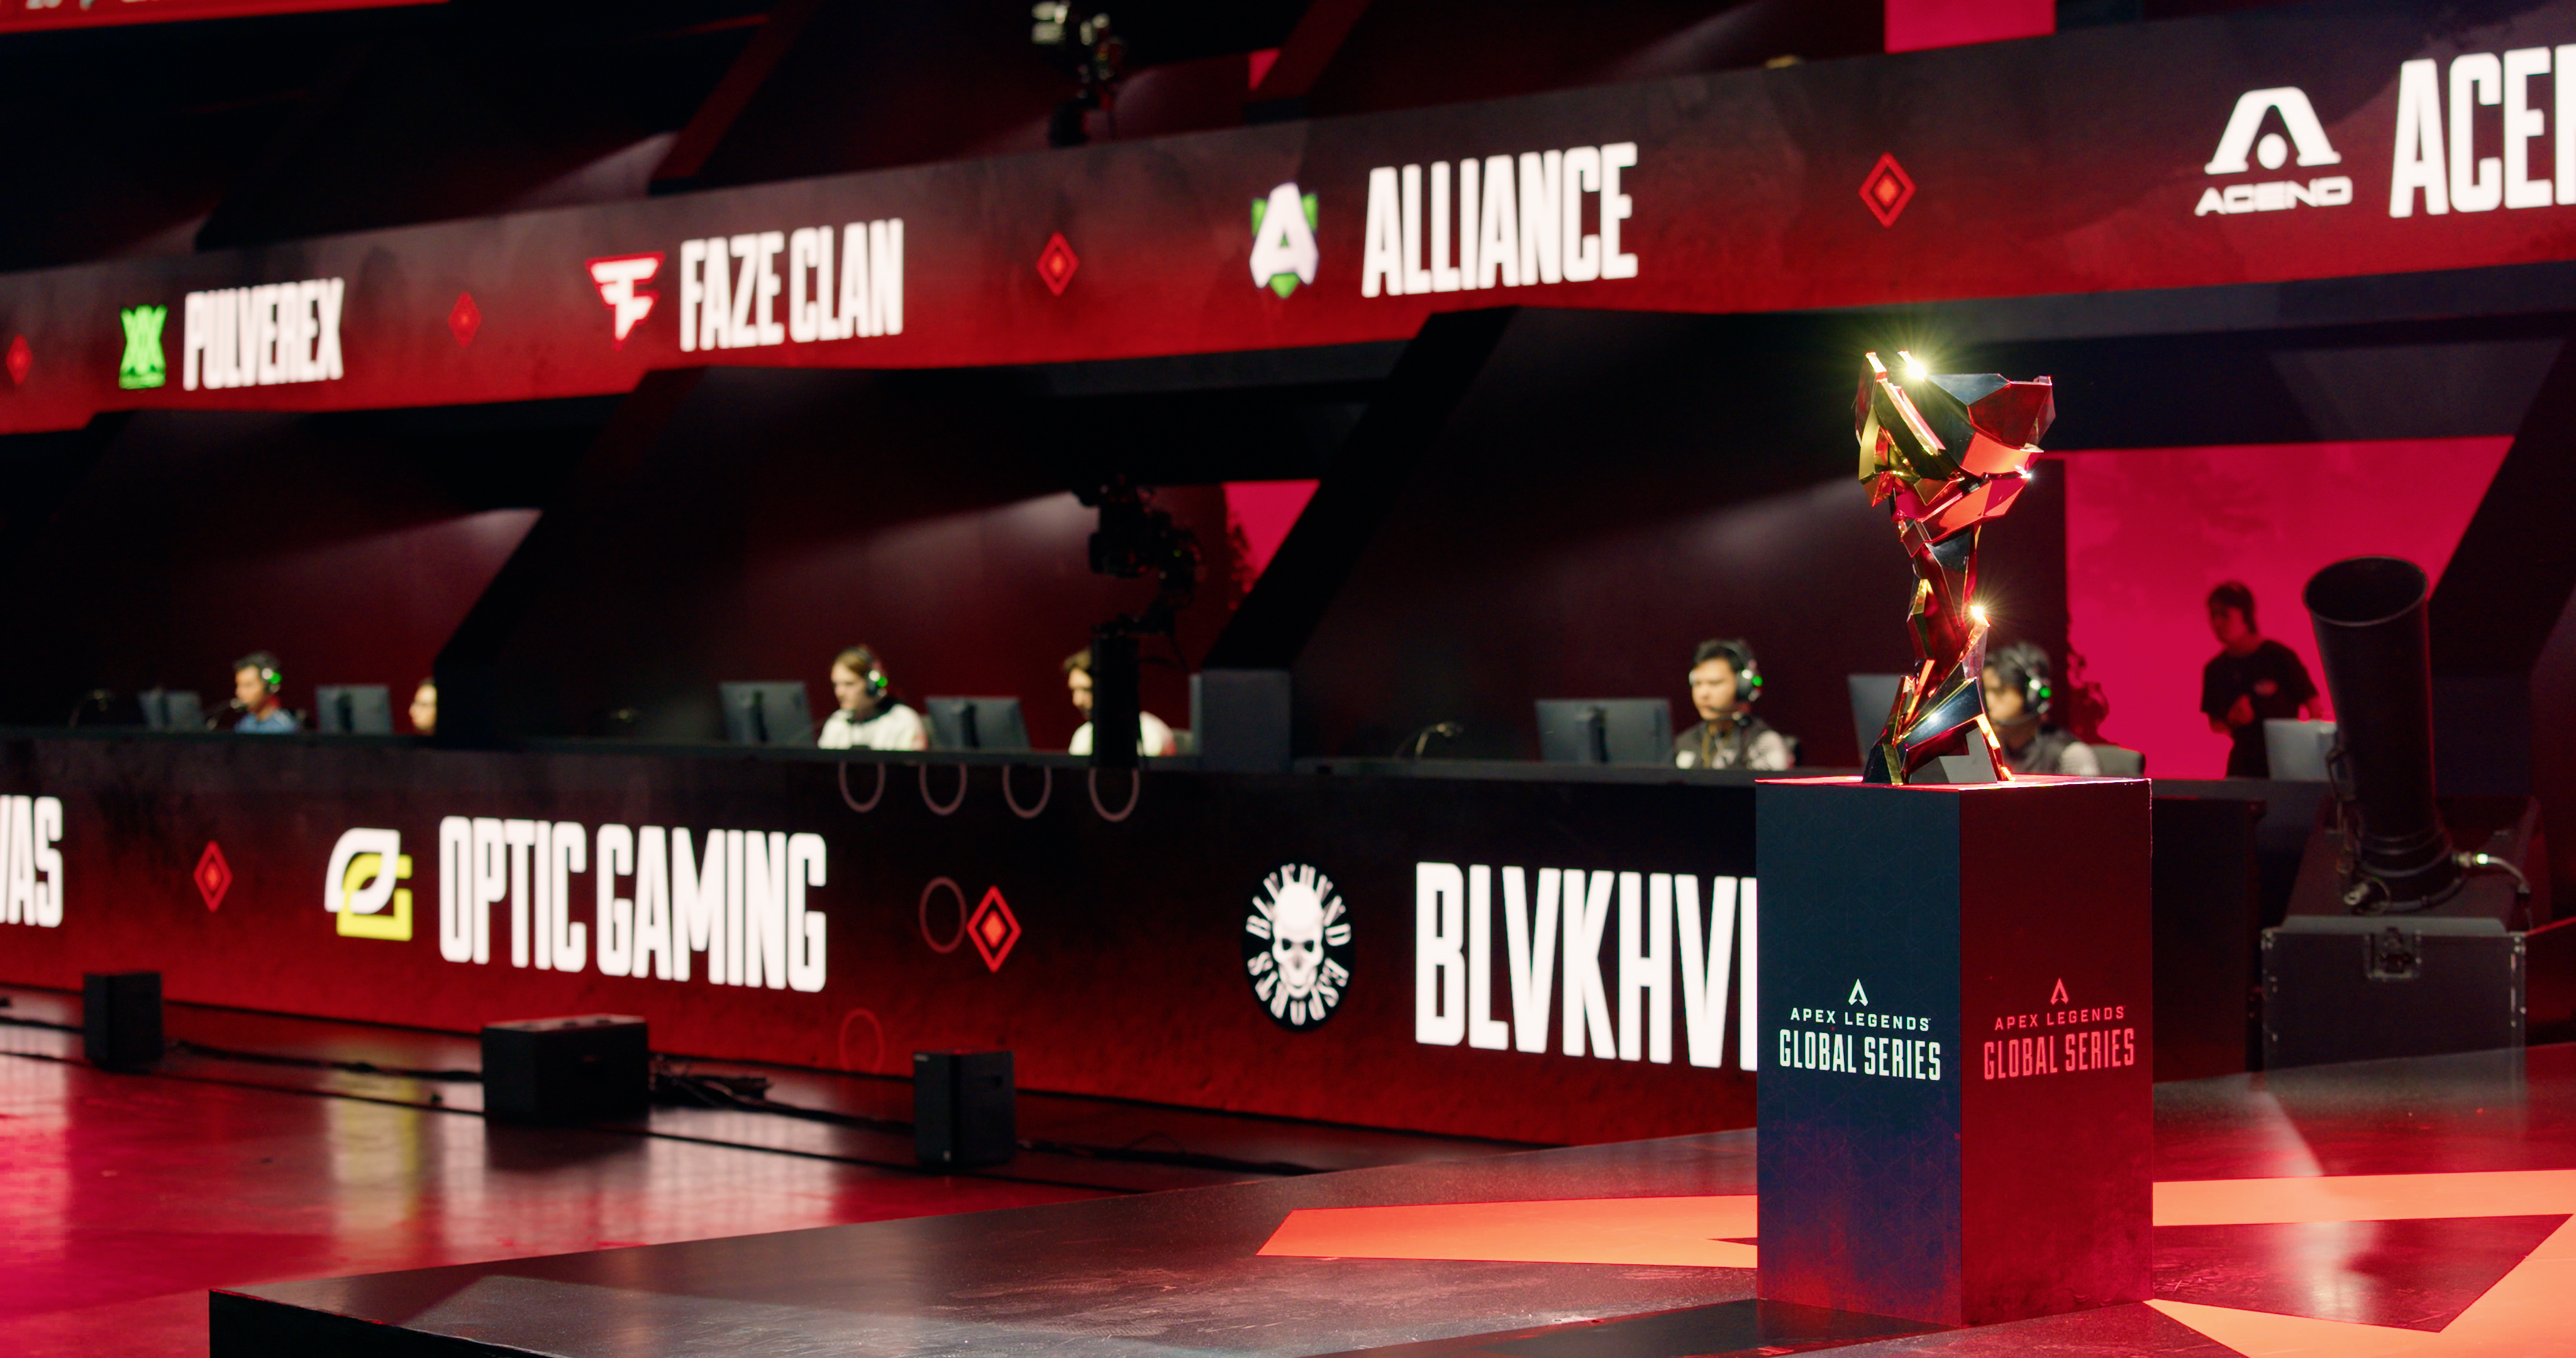 Everything You Need to Know About the Overwatch® World Cup Group Stage and  Finals - News - Overwatch